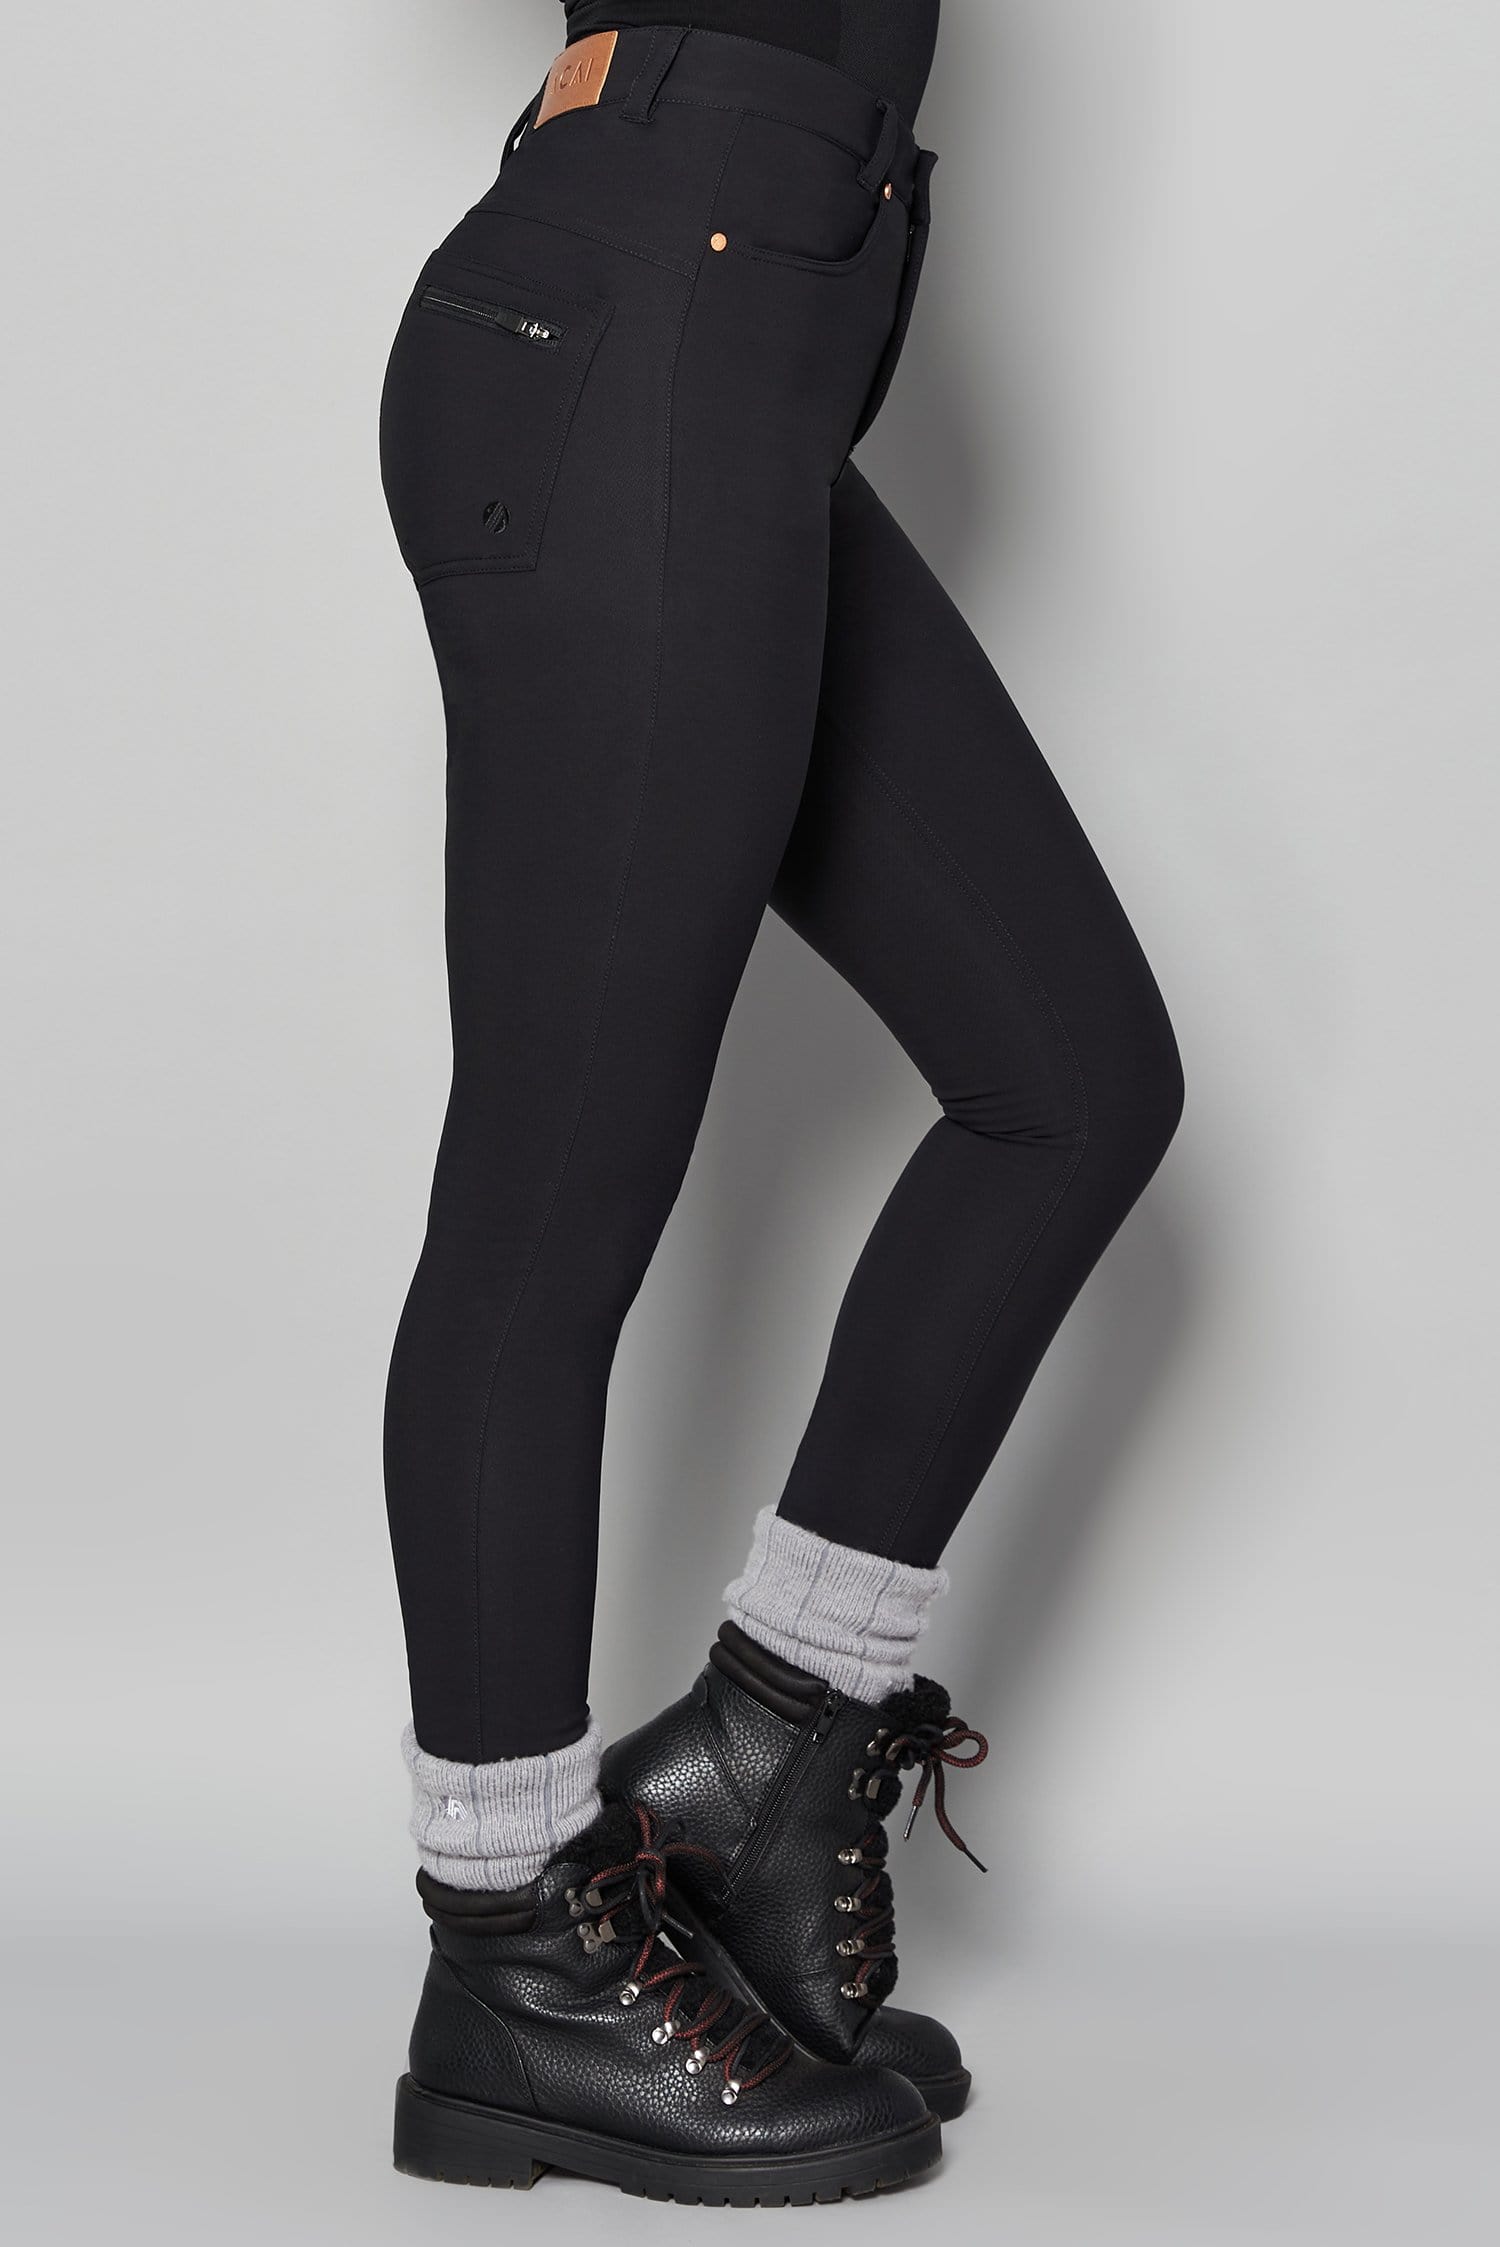 Thermal Skinny Outdoor Trousers - Black - 24r / Uk6 - Womens - Acai Outdoorwear